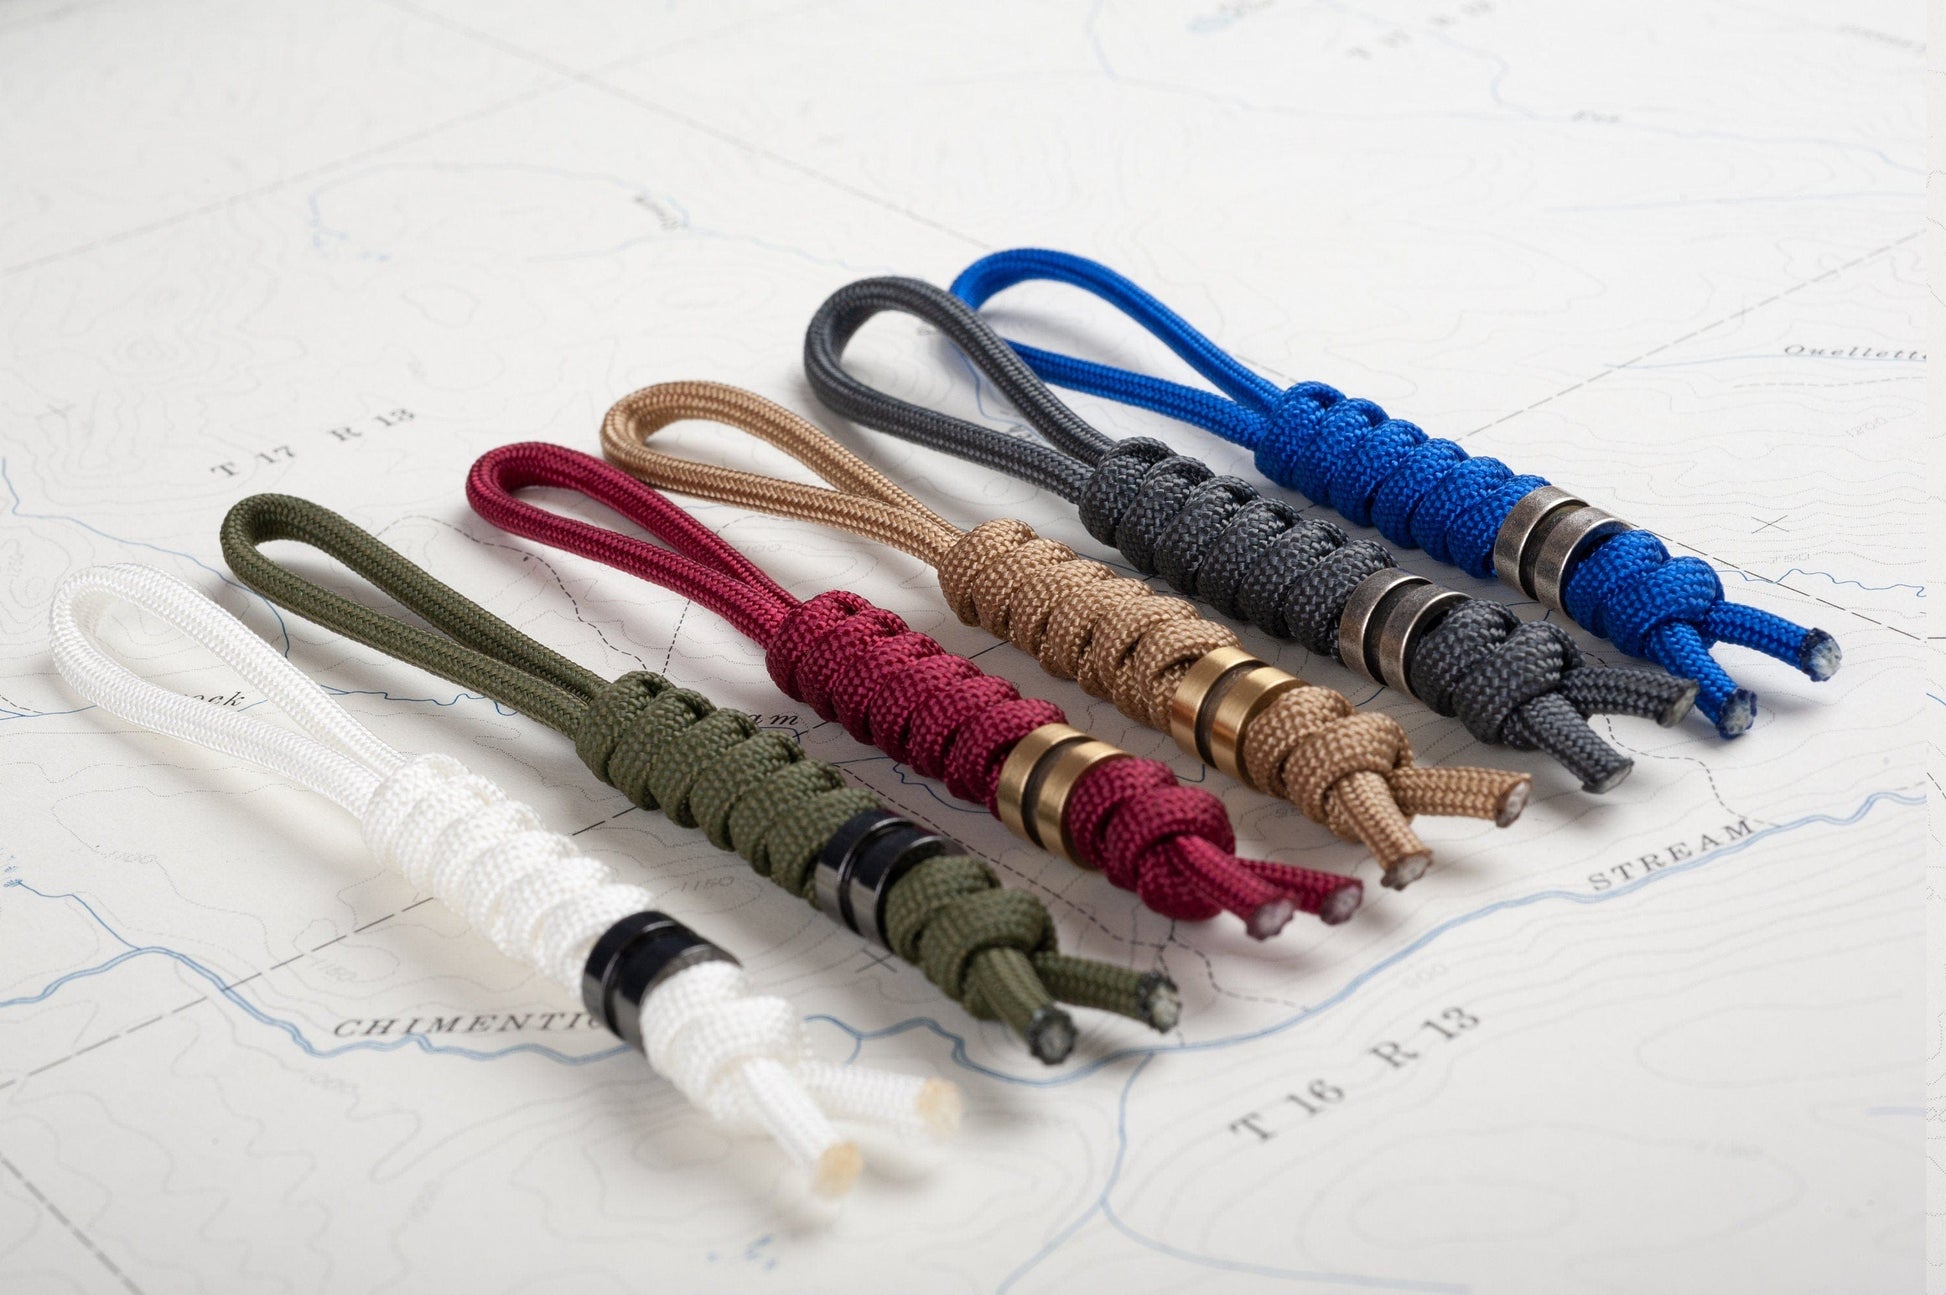 Paracord Knife Lanyard | Choose From 105 Cord Colors and 5 Beads